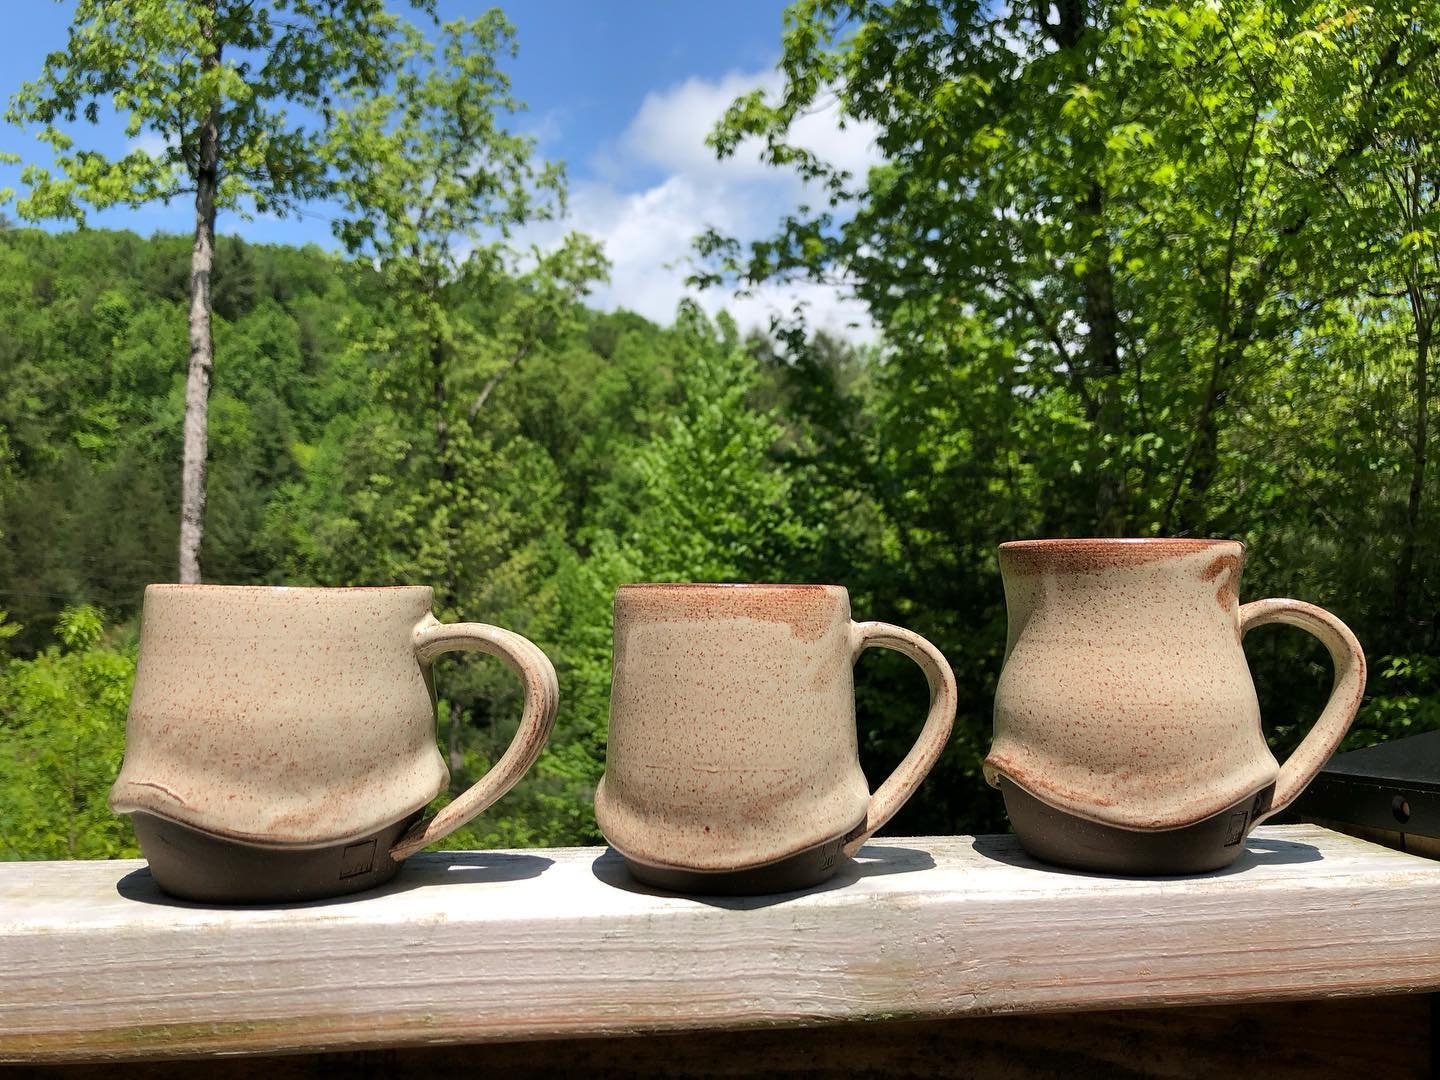 For the second Mother&rsquo;s Day in a row, I&rsquo;ve made these skirt mugs to celebrate. This year is a beautiful dark brown clay and an oatmeal-color glaze. 

It&rsquo;s rare that I make something and throughout the whole process I say &ldquo;thes